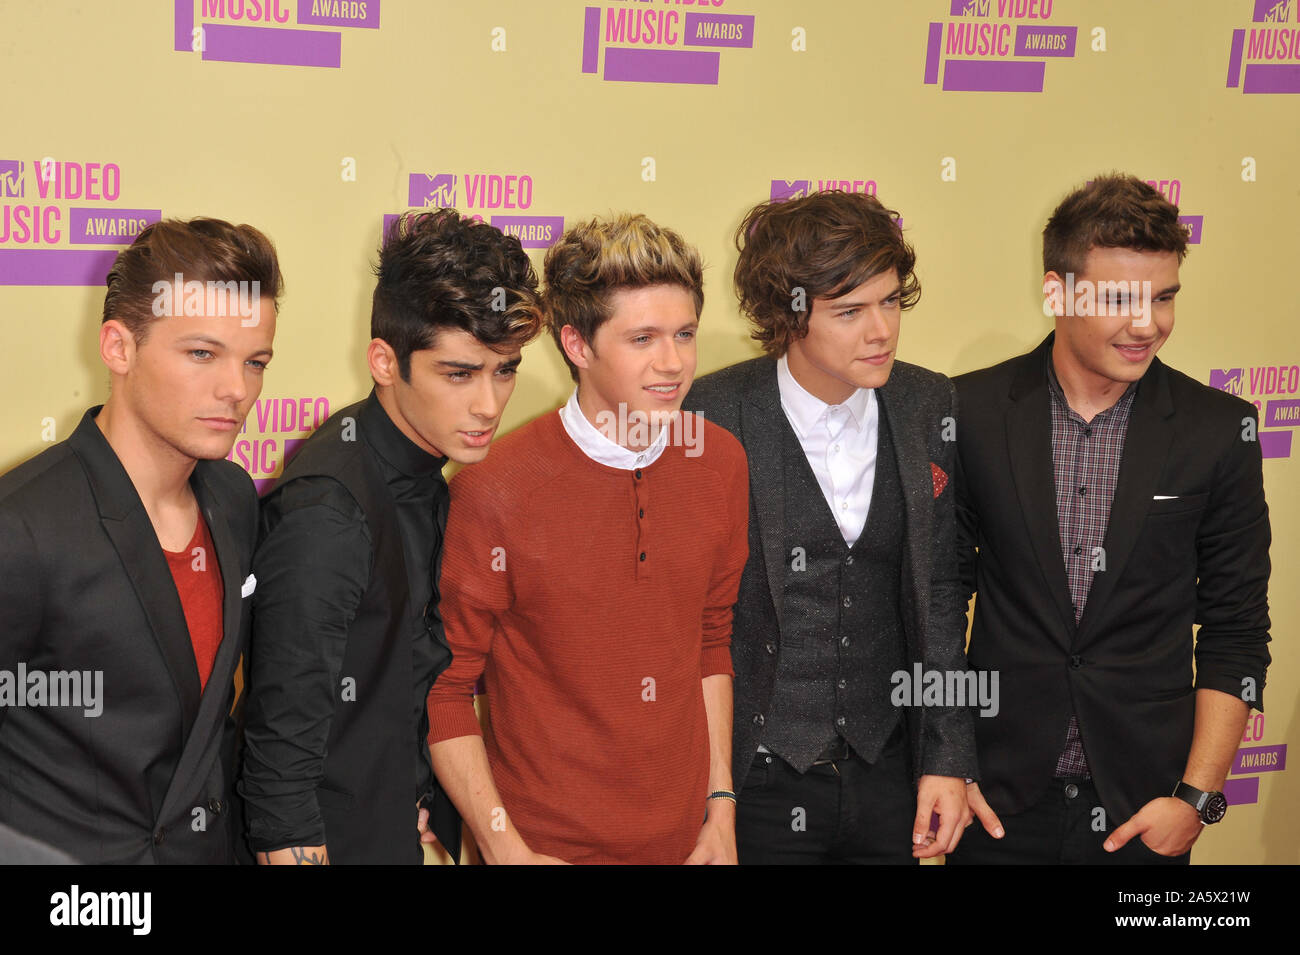 LOS ANGELES, CA. September 07, 2012: One Direction at the 2012 MTV Video Music Awards at Staples Center, Los Angeles. © 2012 Paul Smith / Featureflash Stock Photo